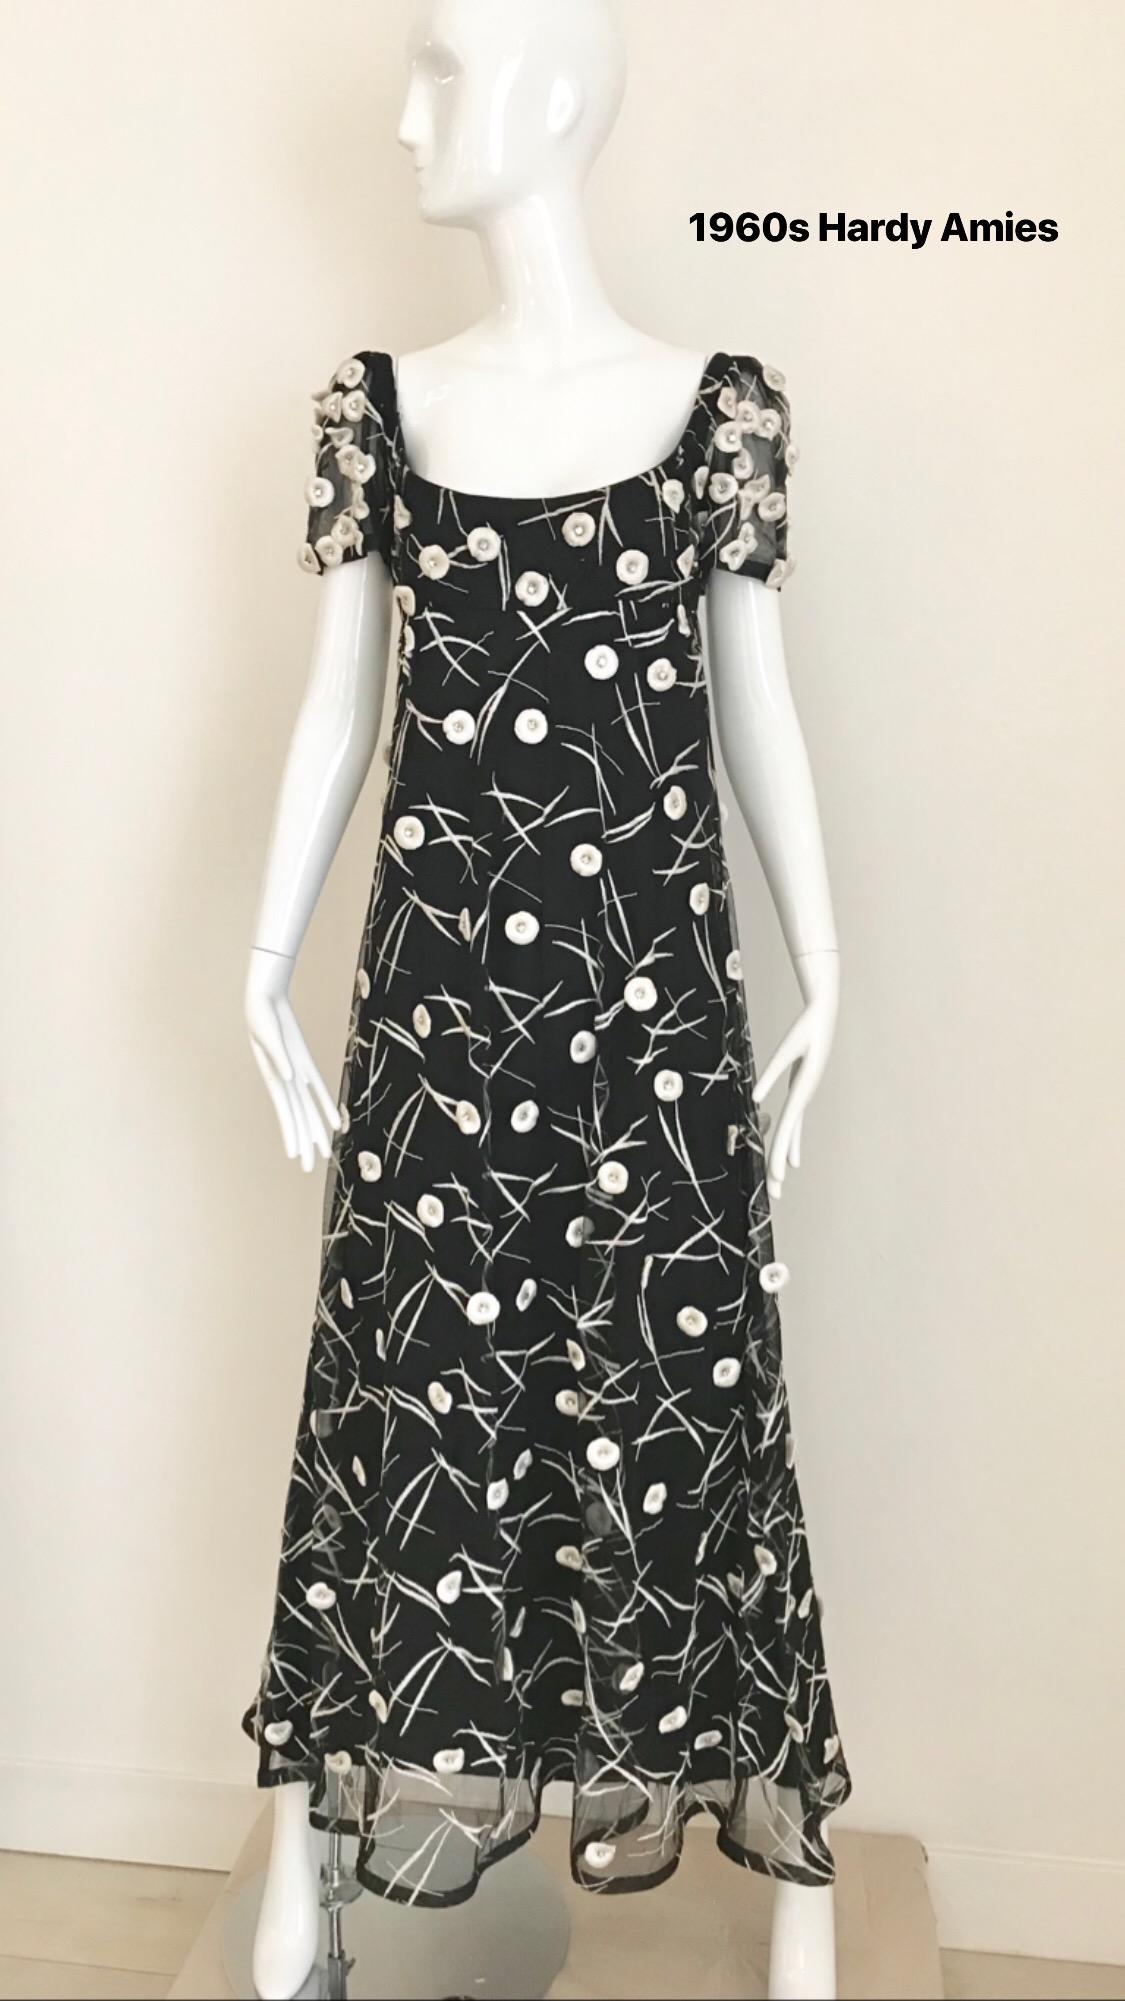 1960s Hardy Amies Black Gown with White Embellishment 8